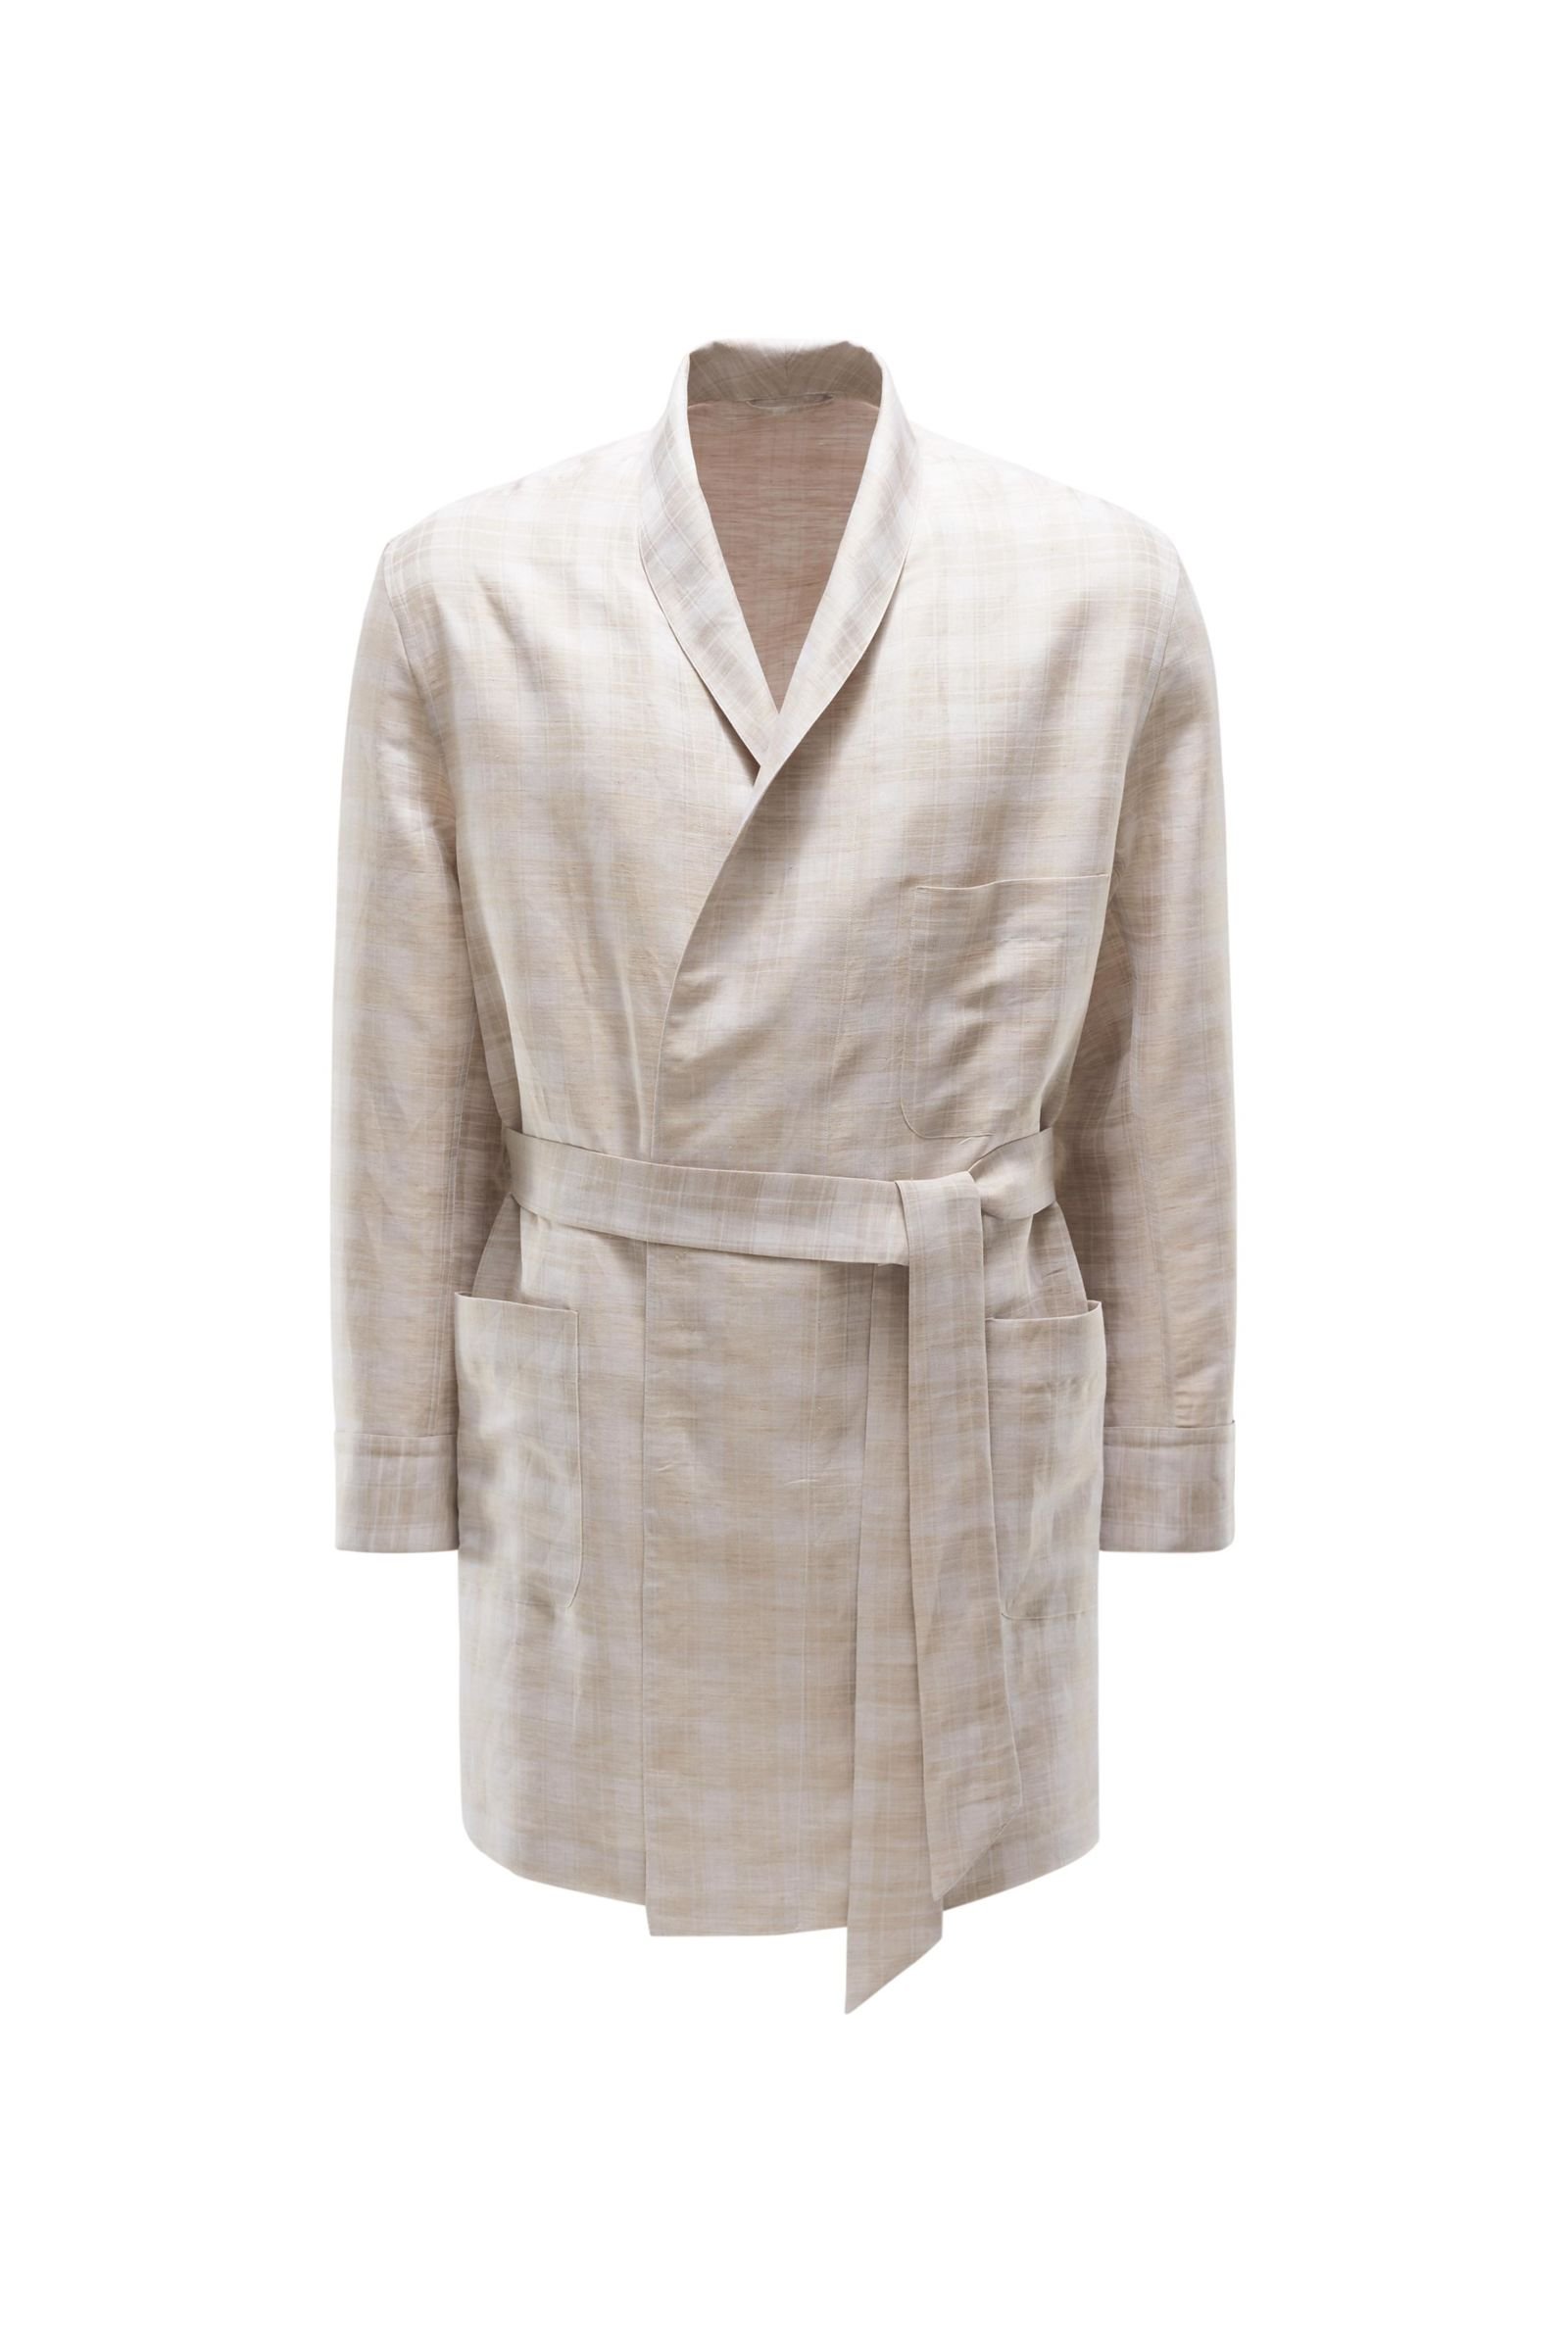 Dressing gown beige checked